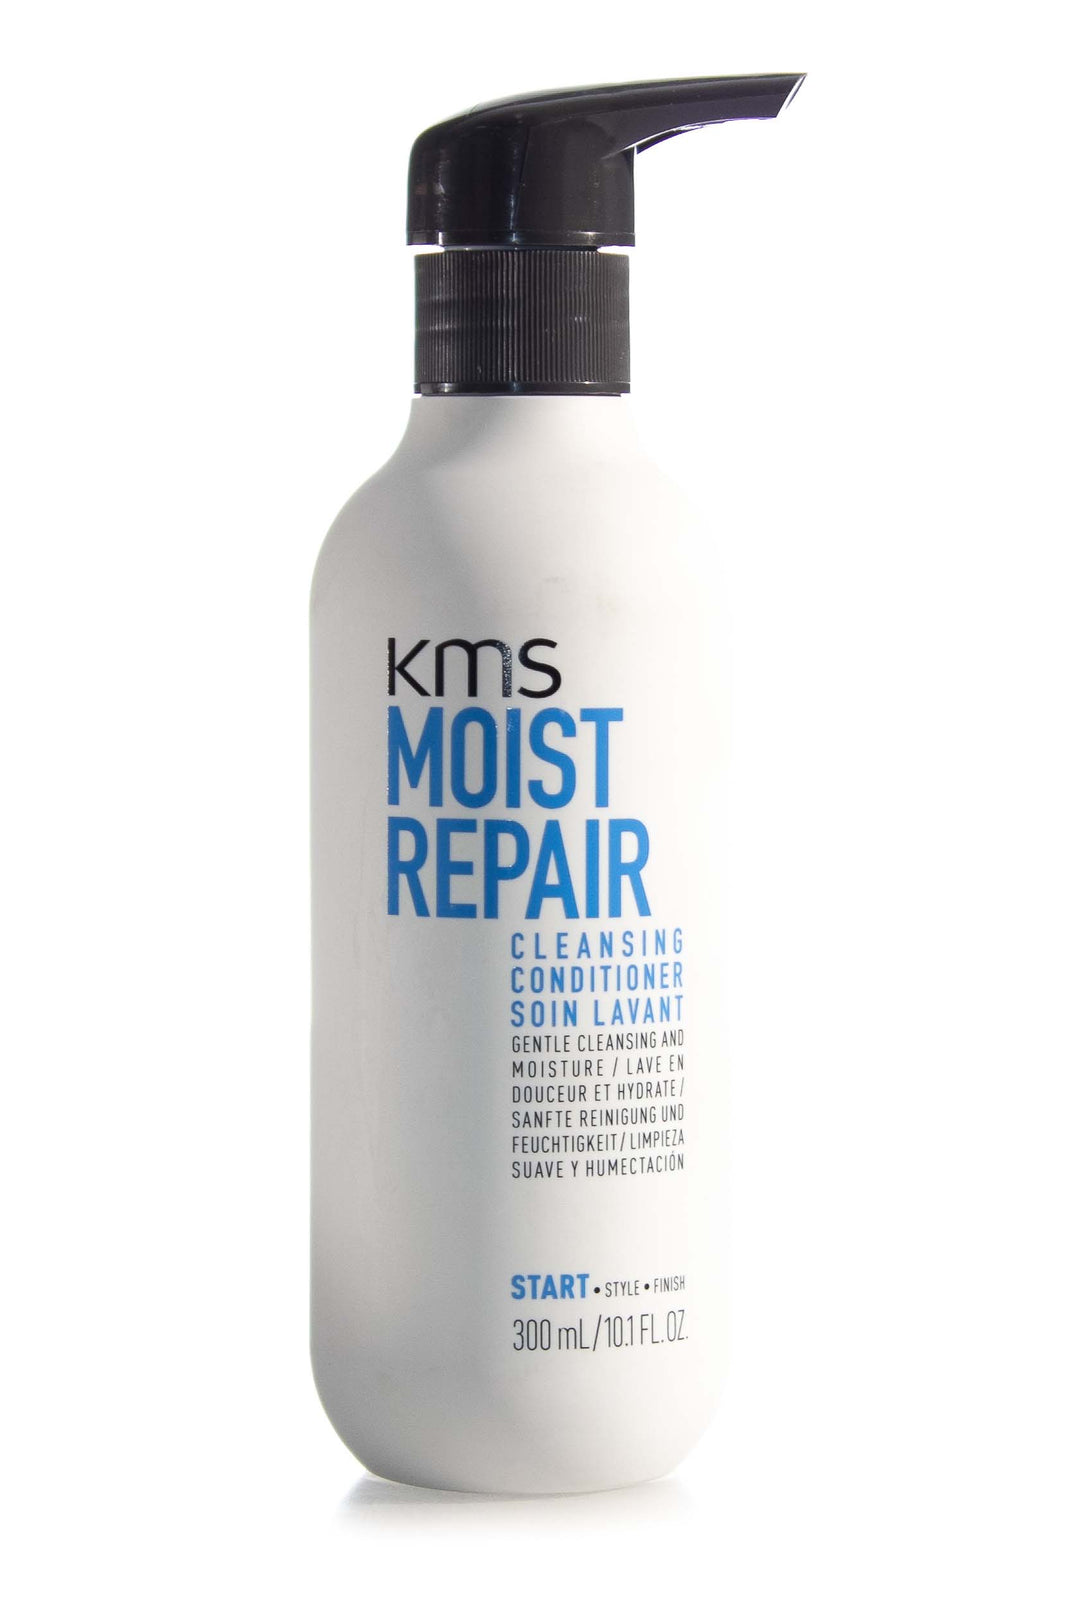 kms-moist-repair-cleansing-conditioner-300ml